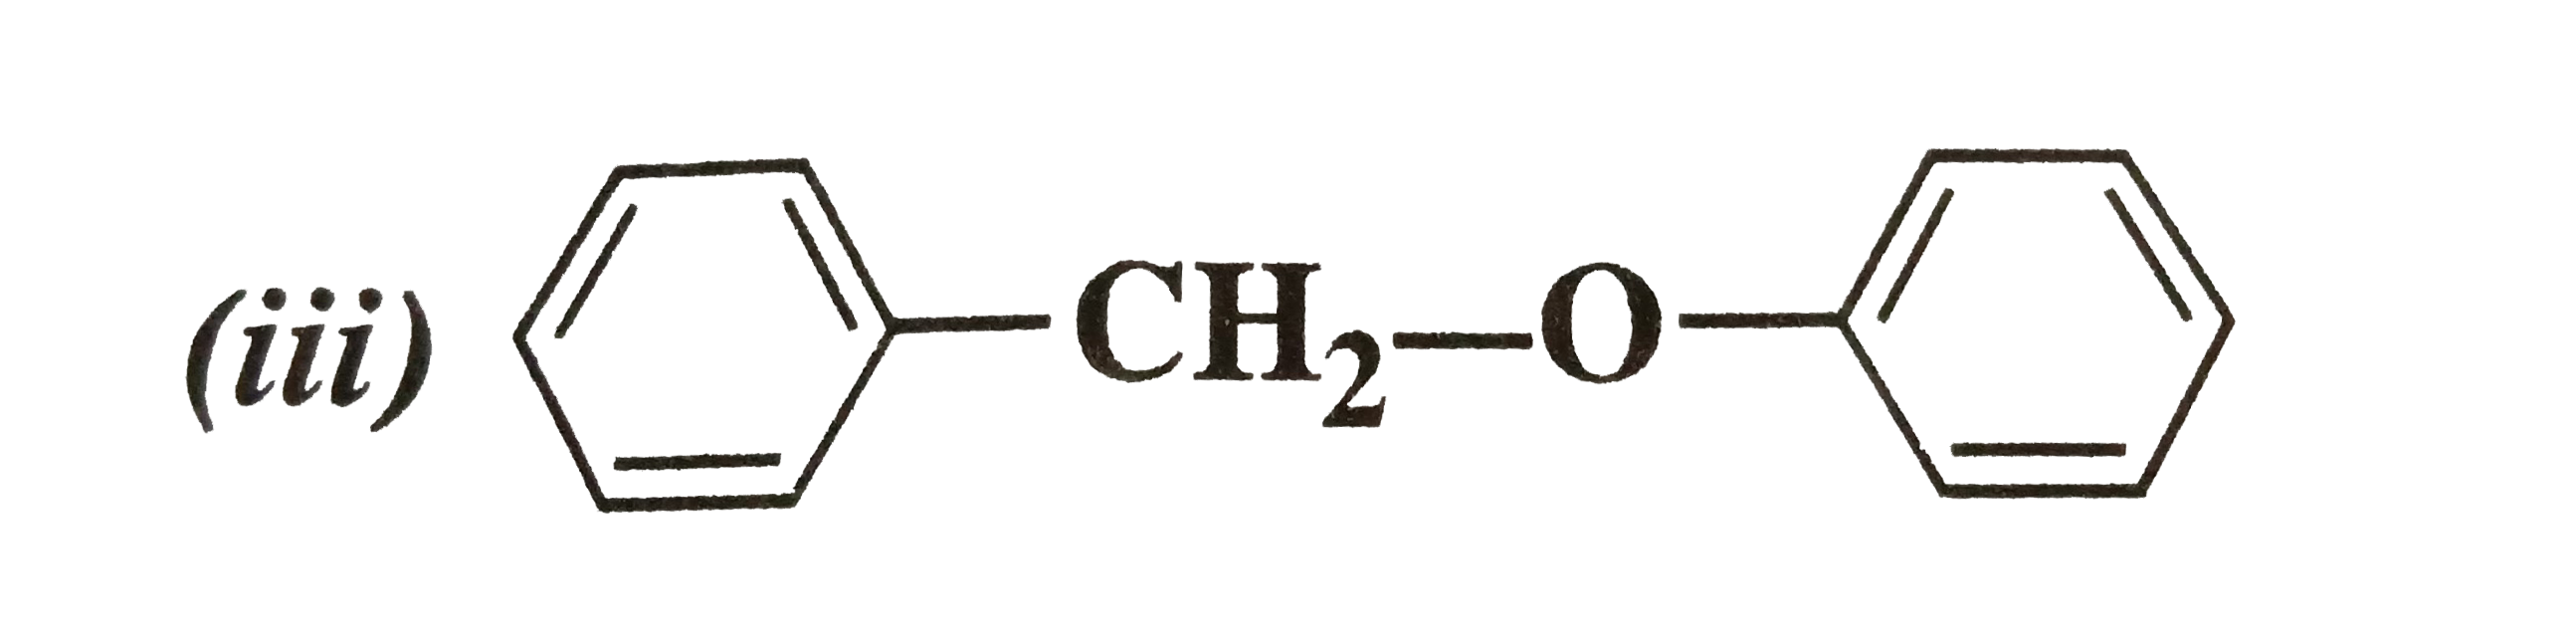 Give the major products that are formed by heating each of the following  ethers with HI   (i) CH(3)-CH(2)-overset(CH(3))overset(|)CH-CH(2)-O-CH(2)-CH(3)